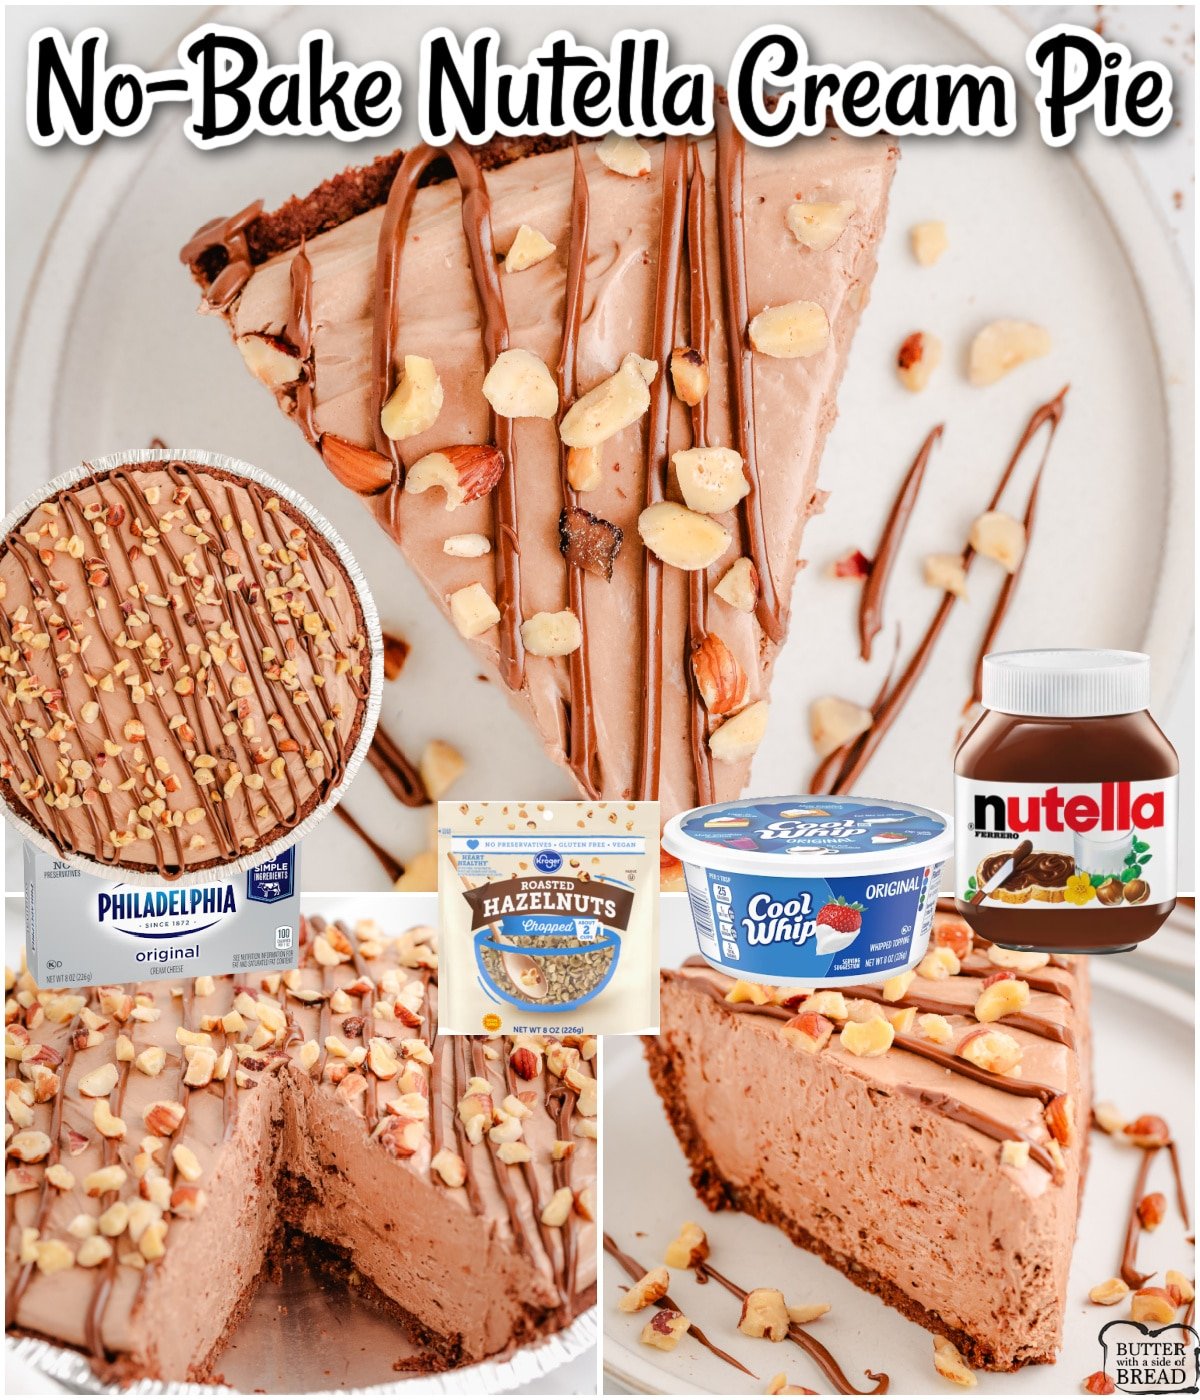 Simple No Bake Nutella Cream Pie that's made in minutes and perfect for hazelnut lovers! Nutella, cream cheese, sugar & whipped topping combine for a fantastic no bake chocolate pie that everyone enjoys.